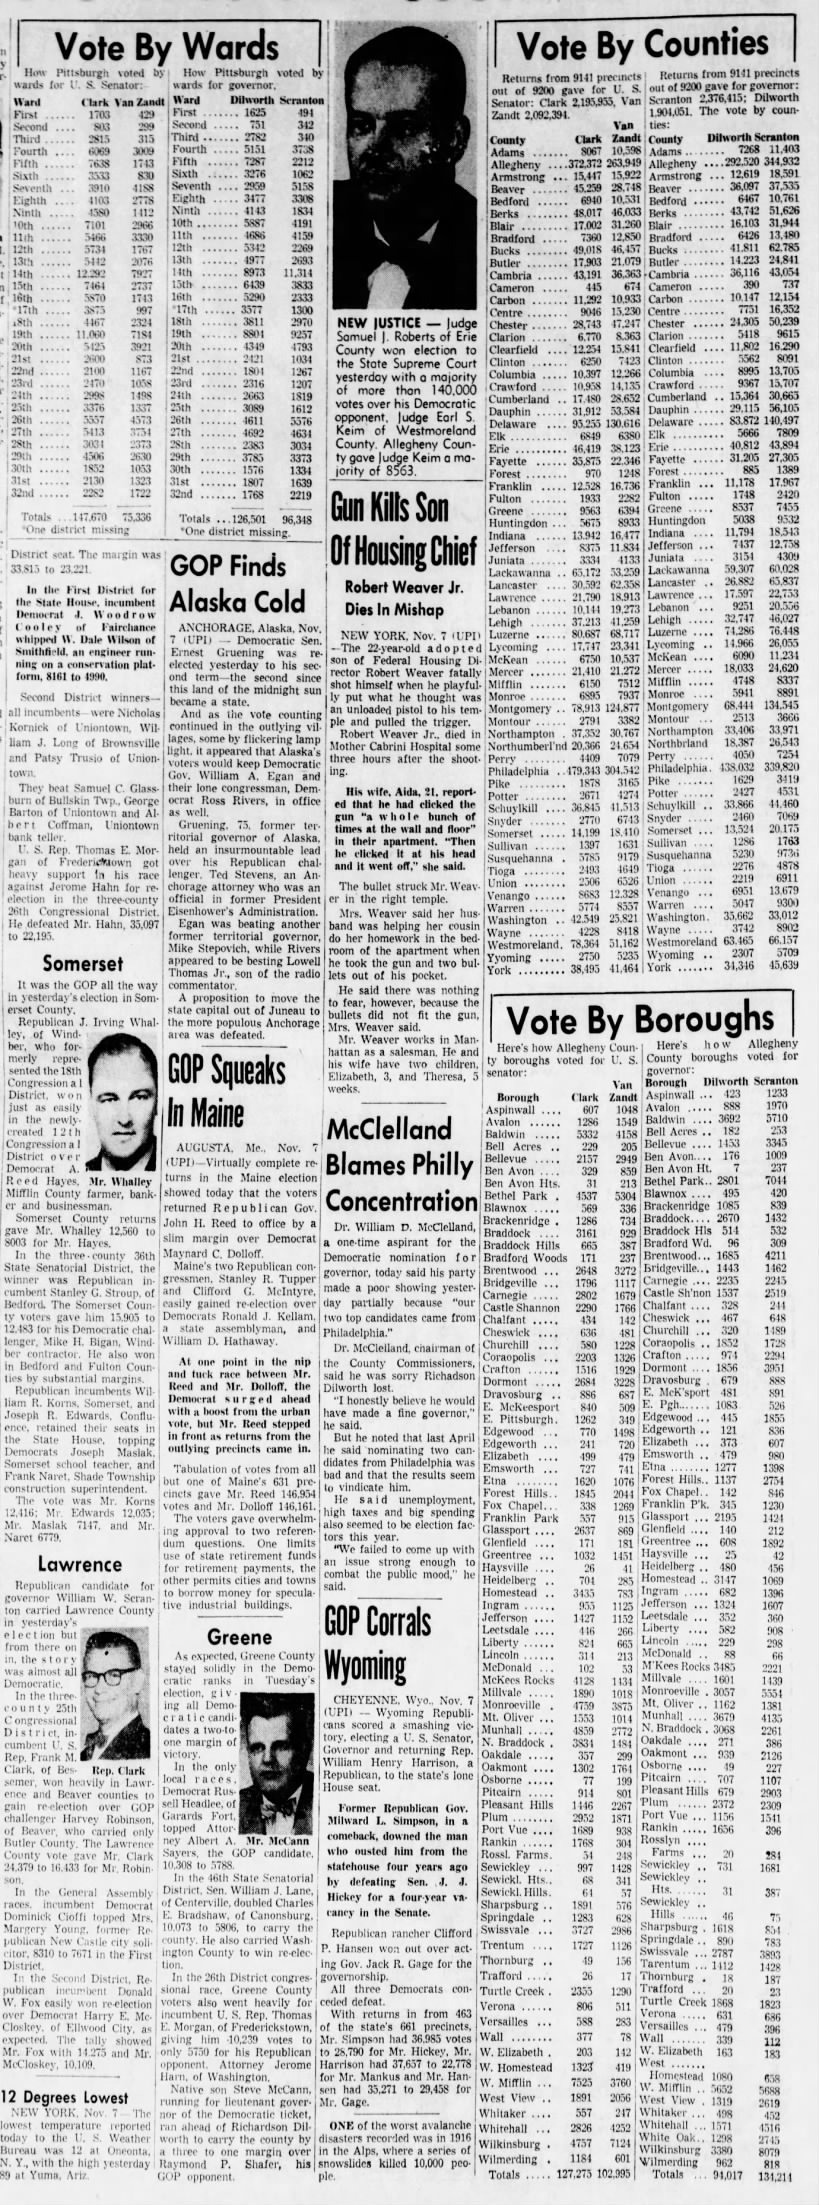 Alleghany County, PA 1962 midterms